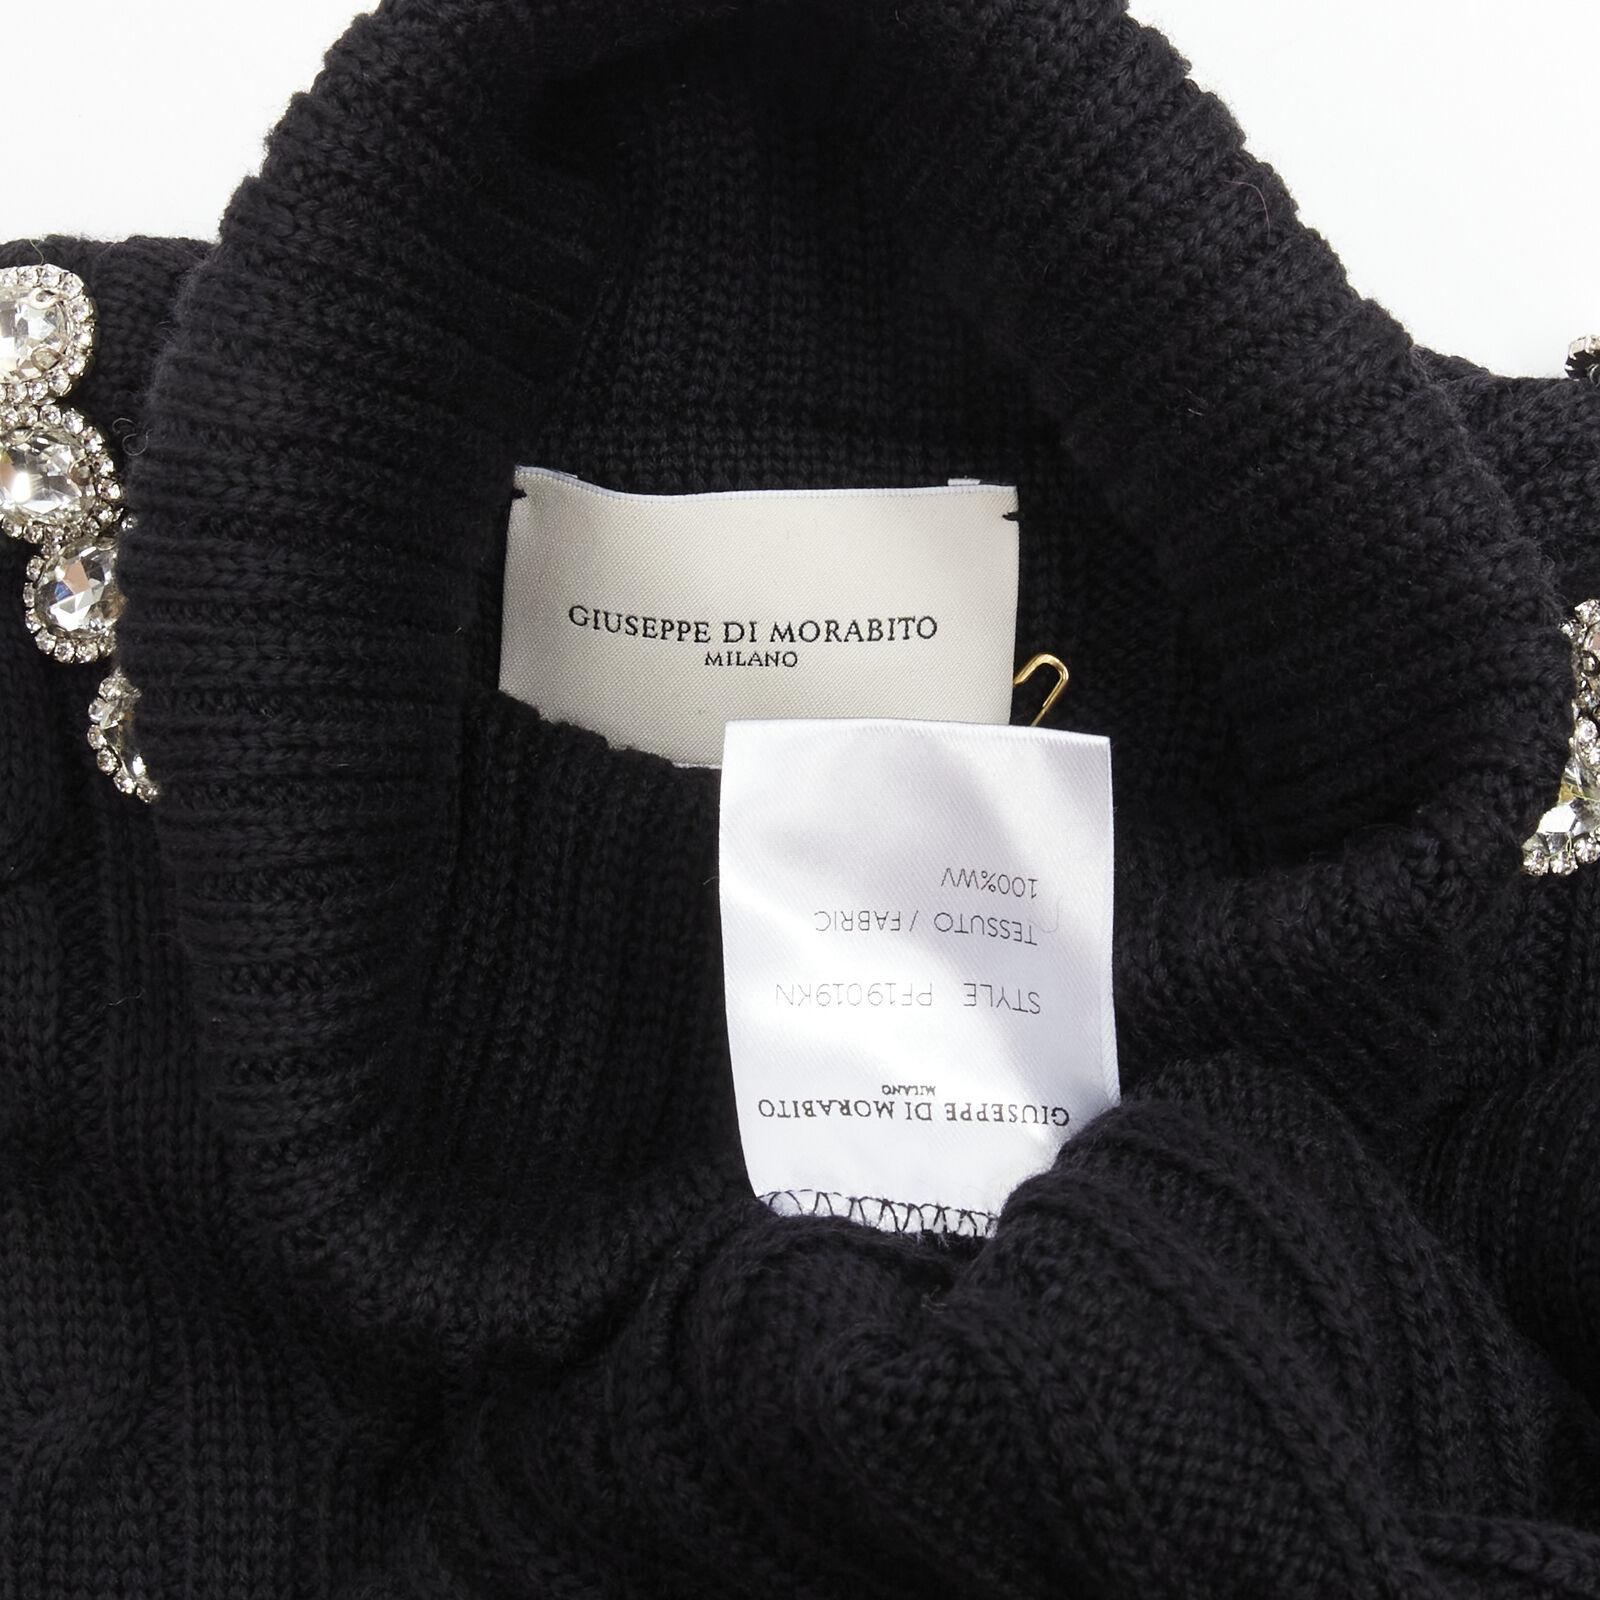 GIUSEPPE DI MORABITO black wool crystal embellished cable knit turtleneck IT38 For Sale 4